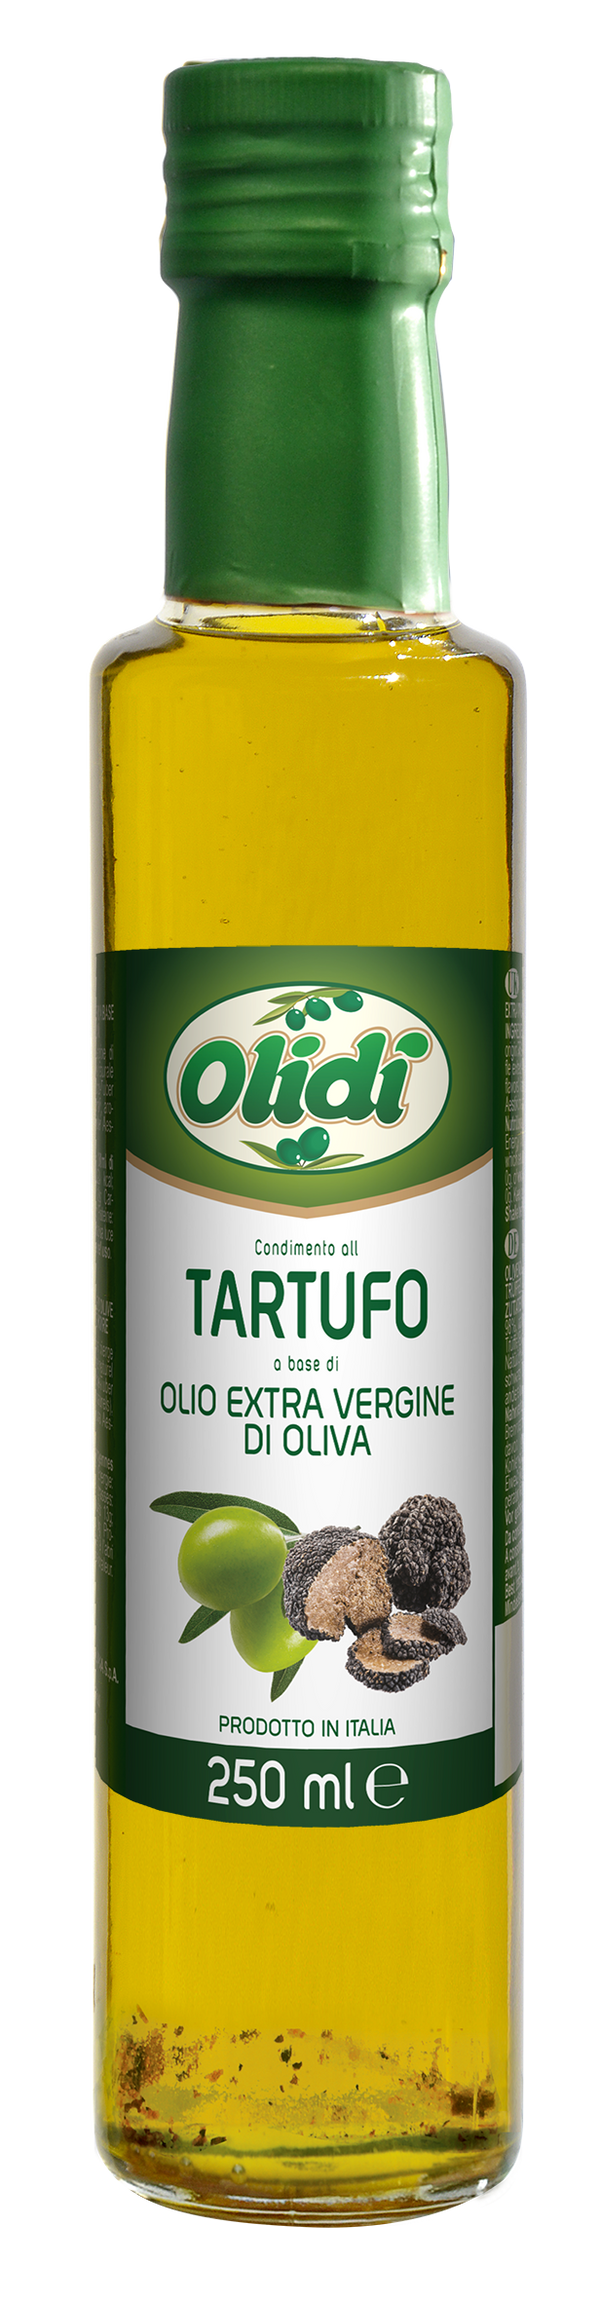 Olive Oil with truffle flavour